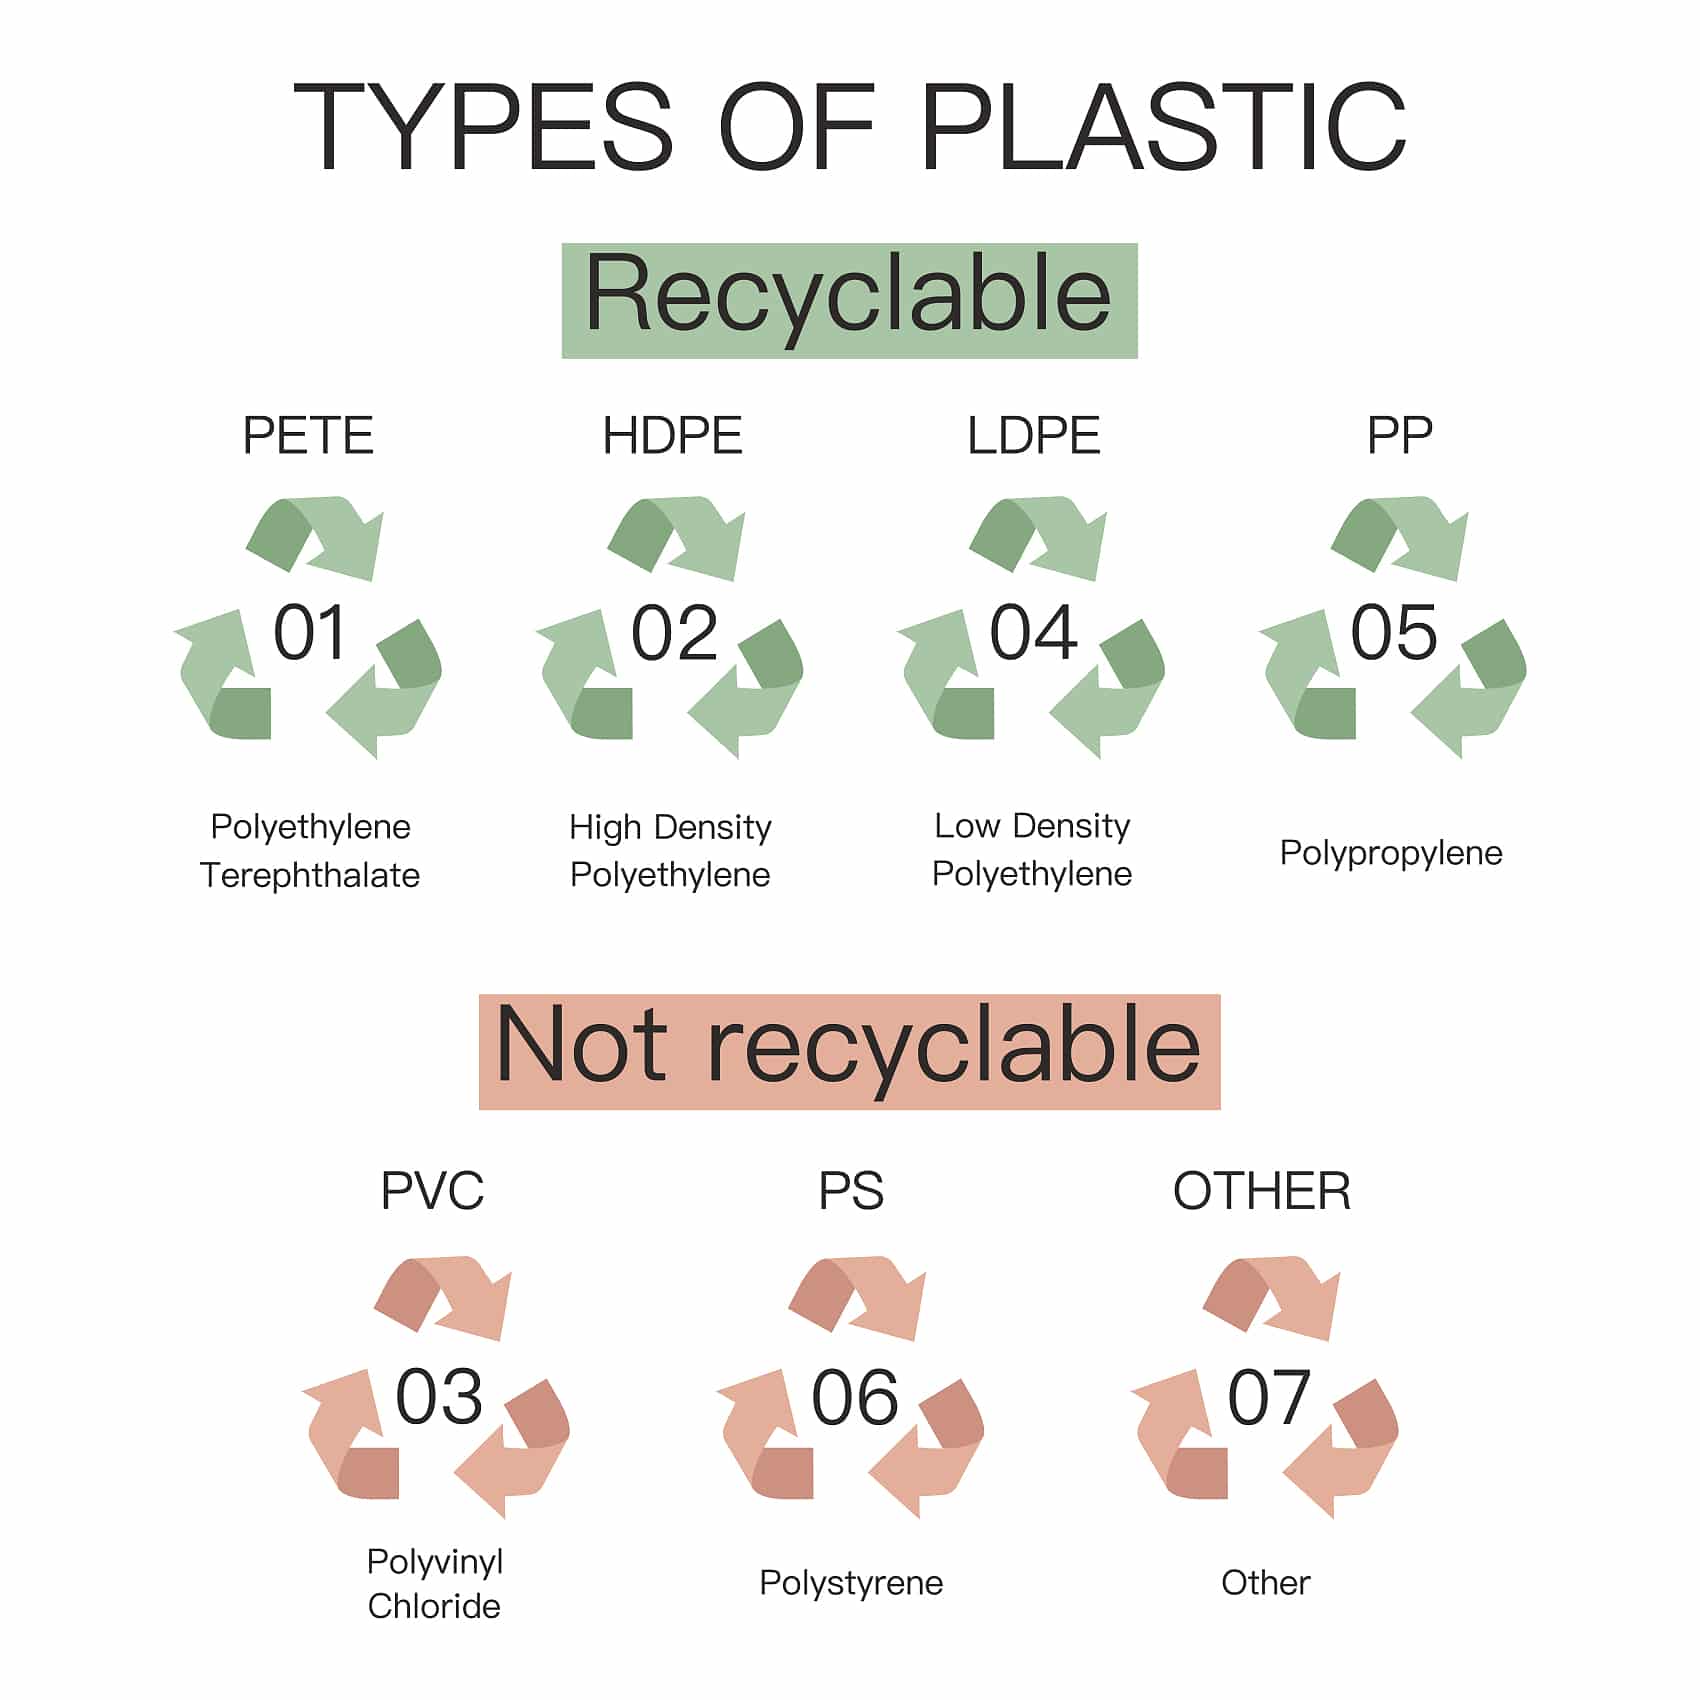 Recycle of Plastic Bottles - Exploring the Environmental Impact of Plastic Packaging